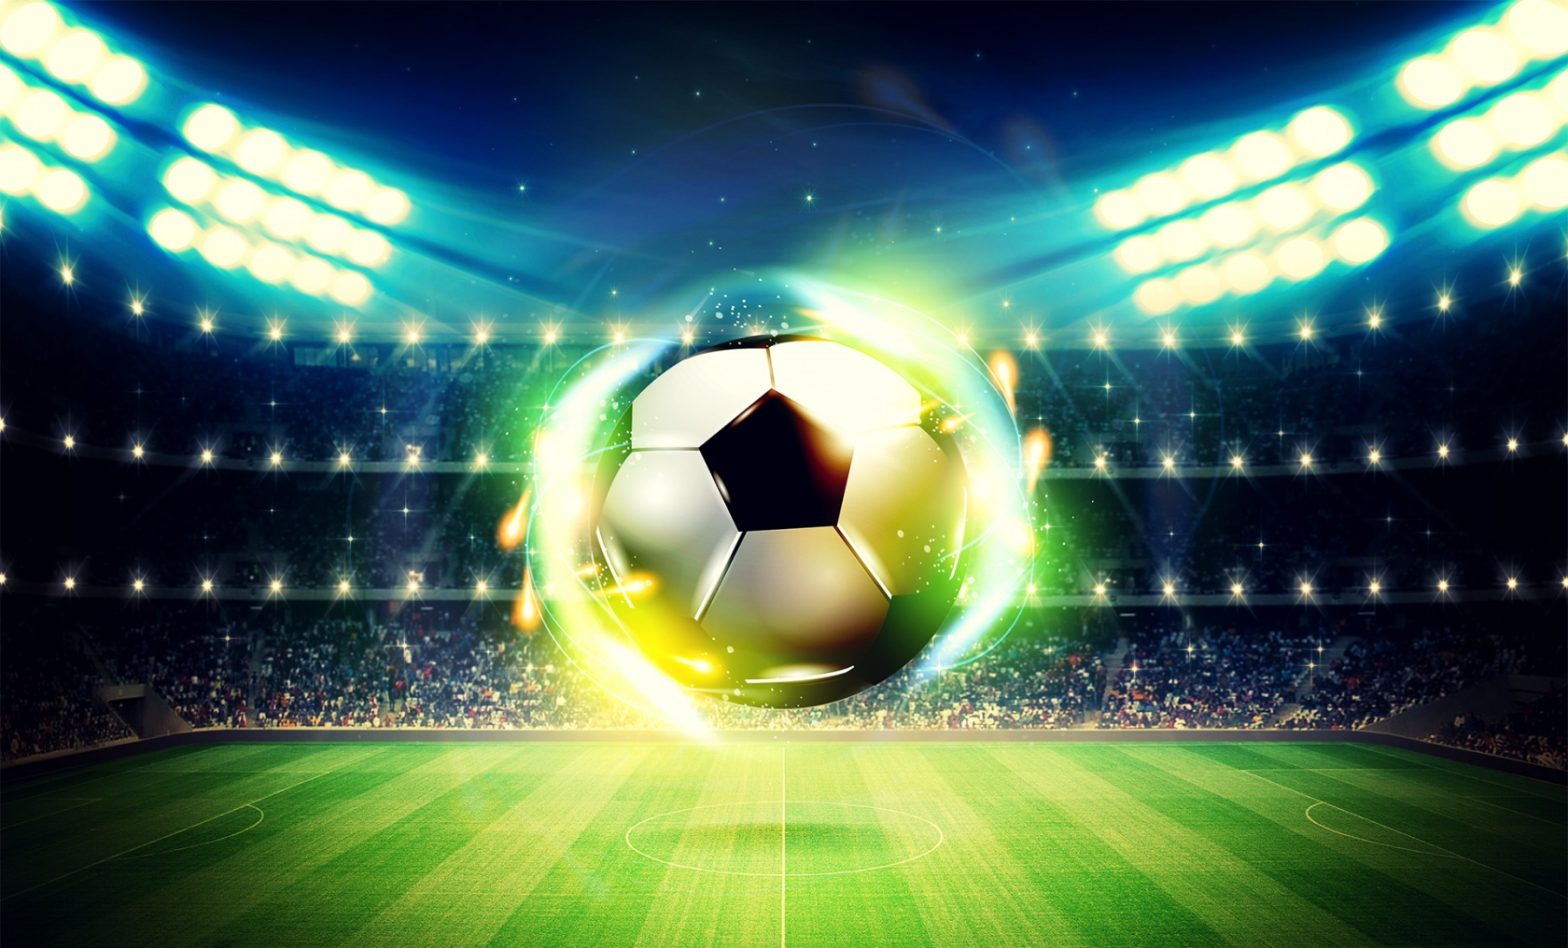 How To Evaluate Football Matches For Betting: Basic Tips And Advice